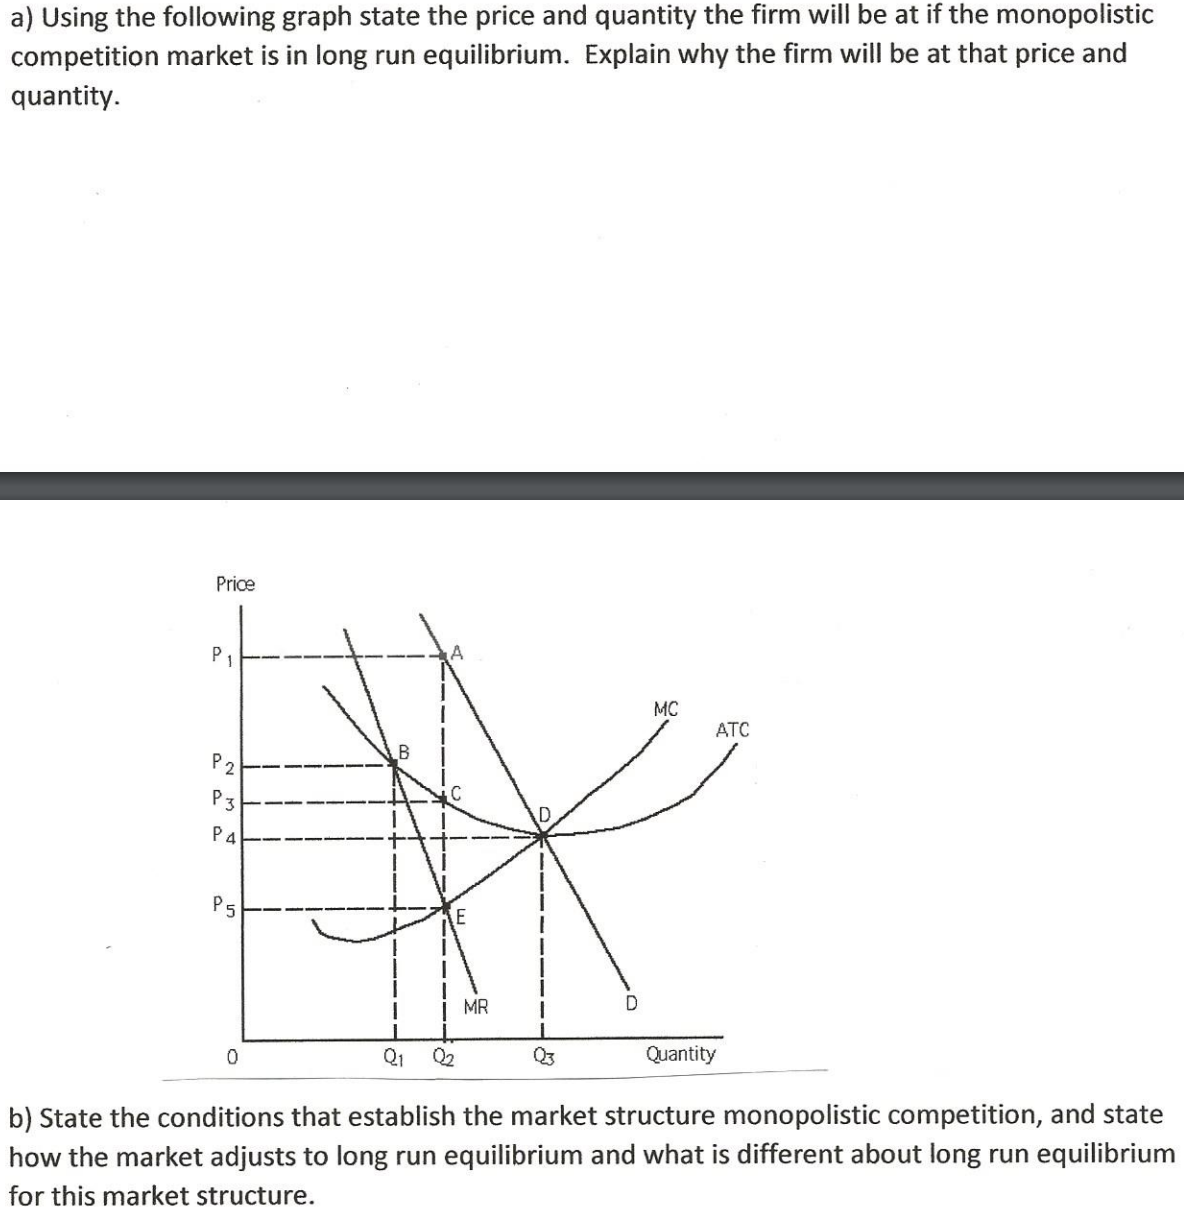 a) Using the following graph state the price and quantity the firm will be at if the monopolistic
competition market is in long run equilibrium. Explain why the firm will be at that price and
quantity.
Price
P1
MC
ATC
B
P 2
P3
P4
P5
MR
D
Q2
Q3
Quantity
b) State the conditions that establish the market structure monopolistic competition, and state
how the market adjusts to long run equilibrium and what is different about long run equilibrium
for this market structure.
